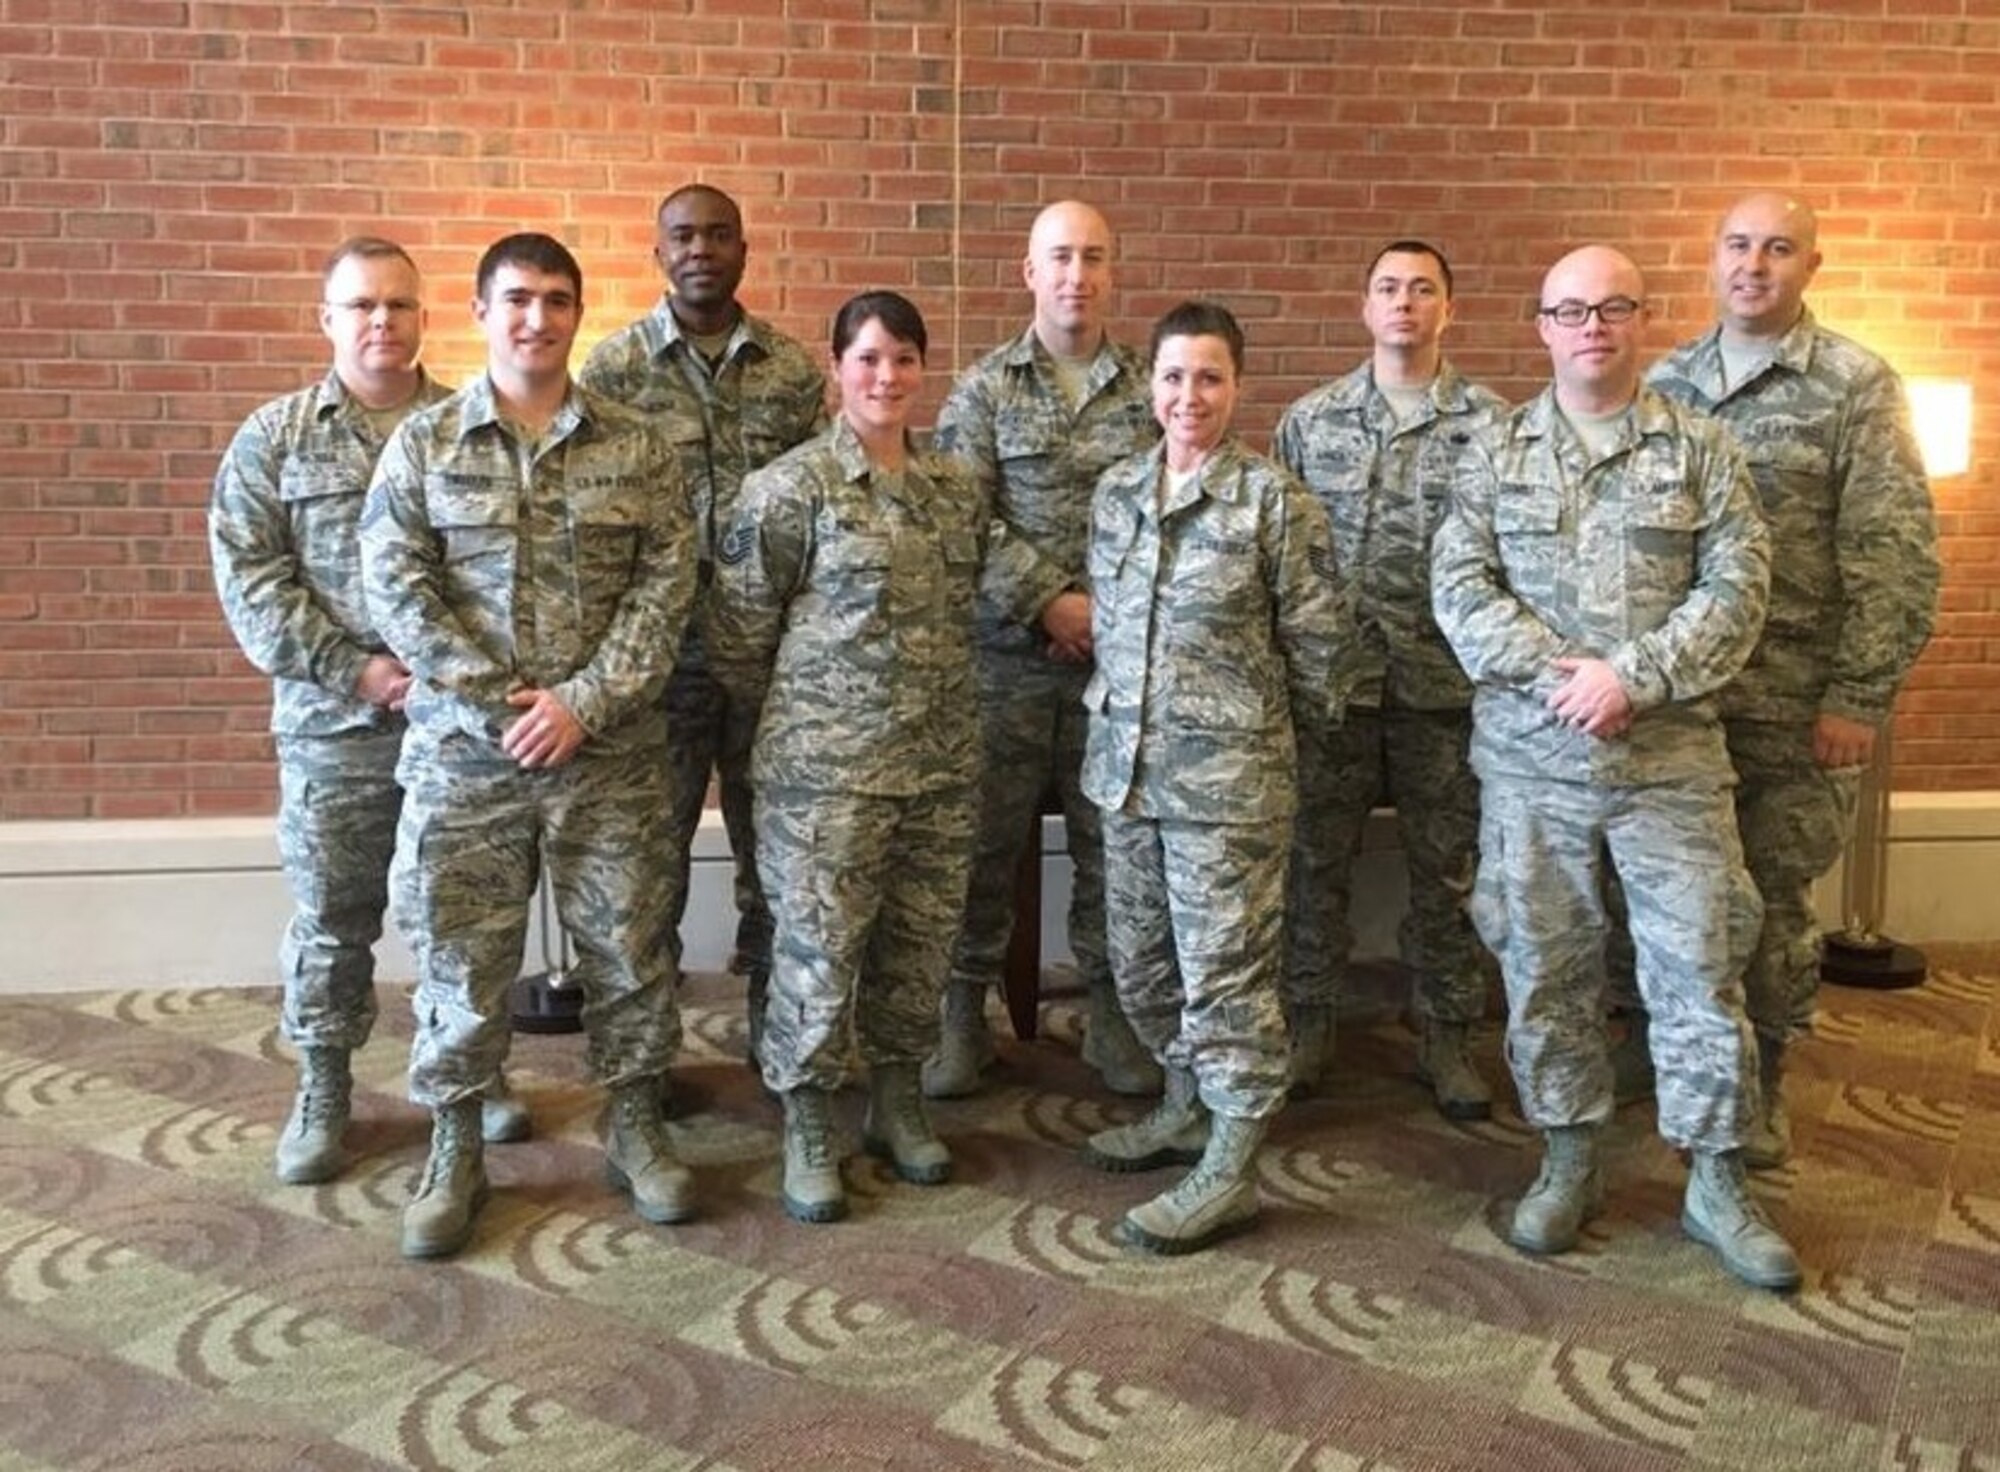 Nine technical sergeants from the New Hampshire Air National Guard recently gathered at the Southbridge Hotel & Conference Center, Southbridge, Mass. for a workshop titled “TIME” (Technical Sergeants Involved and Mentoring Enlisted Airmen) and primarily focused on building strength in enlisted mentorship, leadership, force development and diversity. Top row: Tech Sgts. Grant Nichols 157th Air Refueling Wing,  Henry Burch, 157th Logistics Readiness Squadron, Corey Sheckler, 157th Security Forces Squadron, Kris Mauchly, 157 SFS, and Brike Hall, 157th Communications Flight. Bottom row: Tech Sgts. Christian Swegles, 157th Logistics Readiness Squadron, Jessica Jewett, 157th Medical Group, Angela Stebbins, 157 MDG, and Jimmy Grindle, 157th Maintenance Squadron. (Courtesy photo) 
